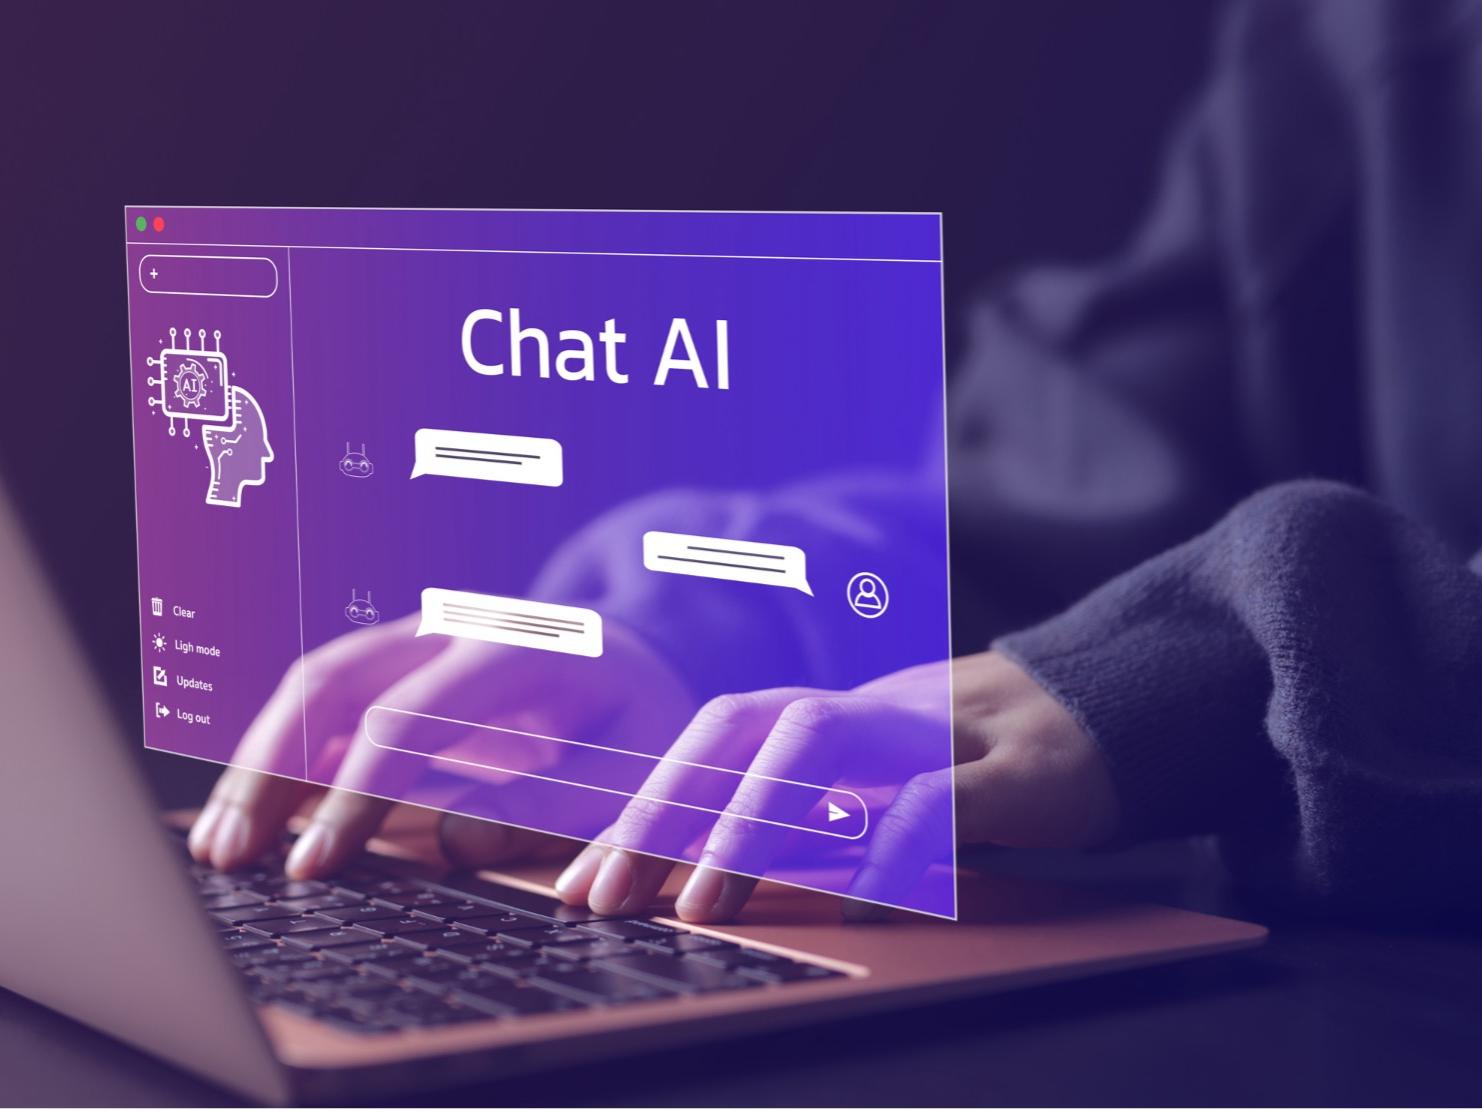 A person seated at a keyboard using Chat AI tools to make something